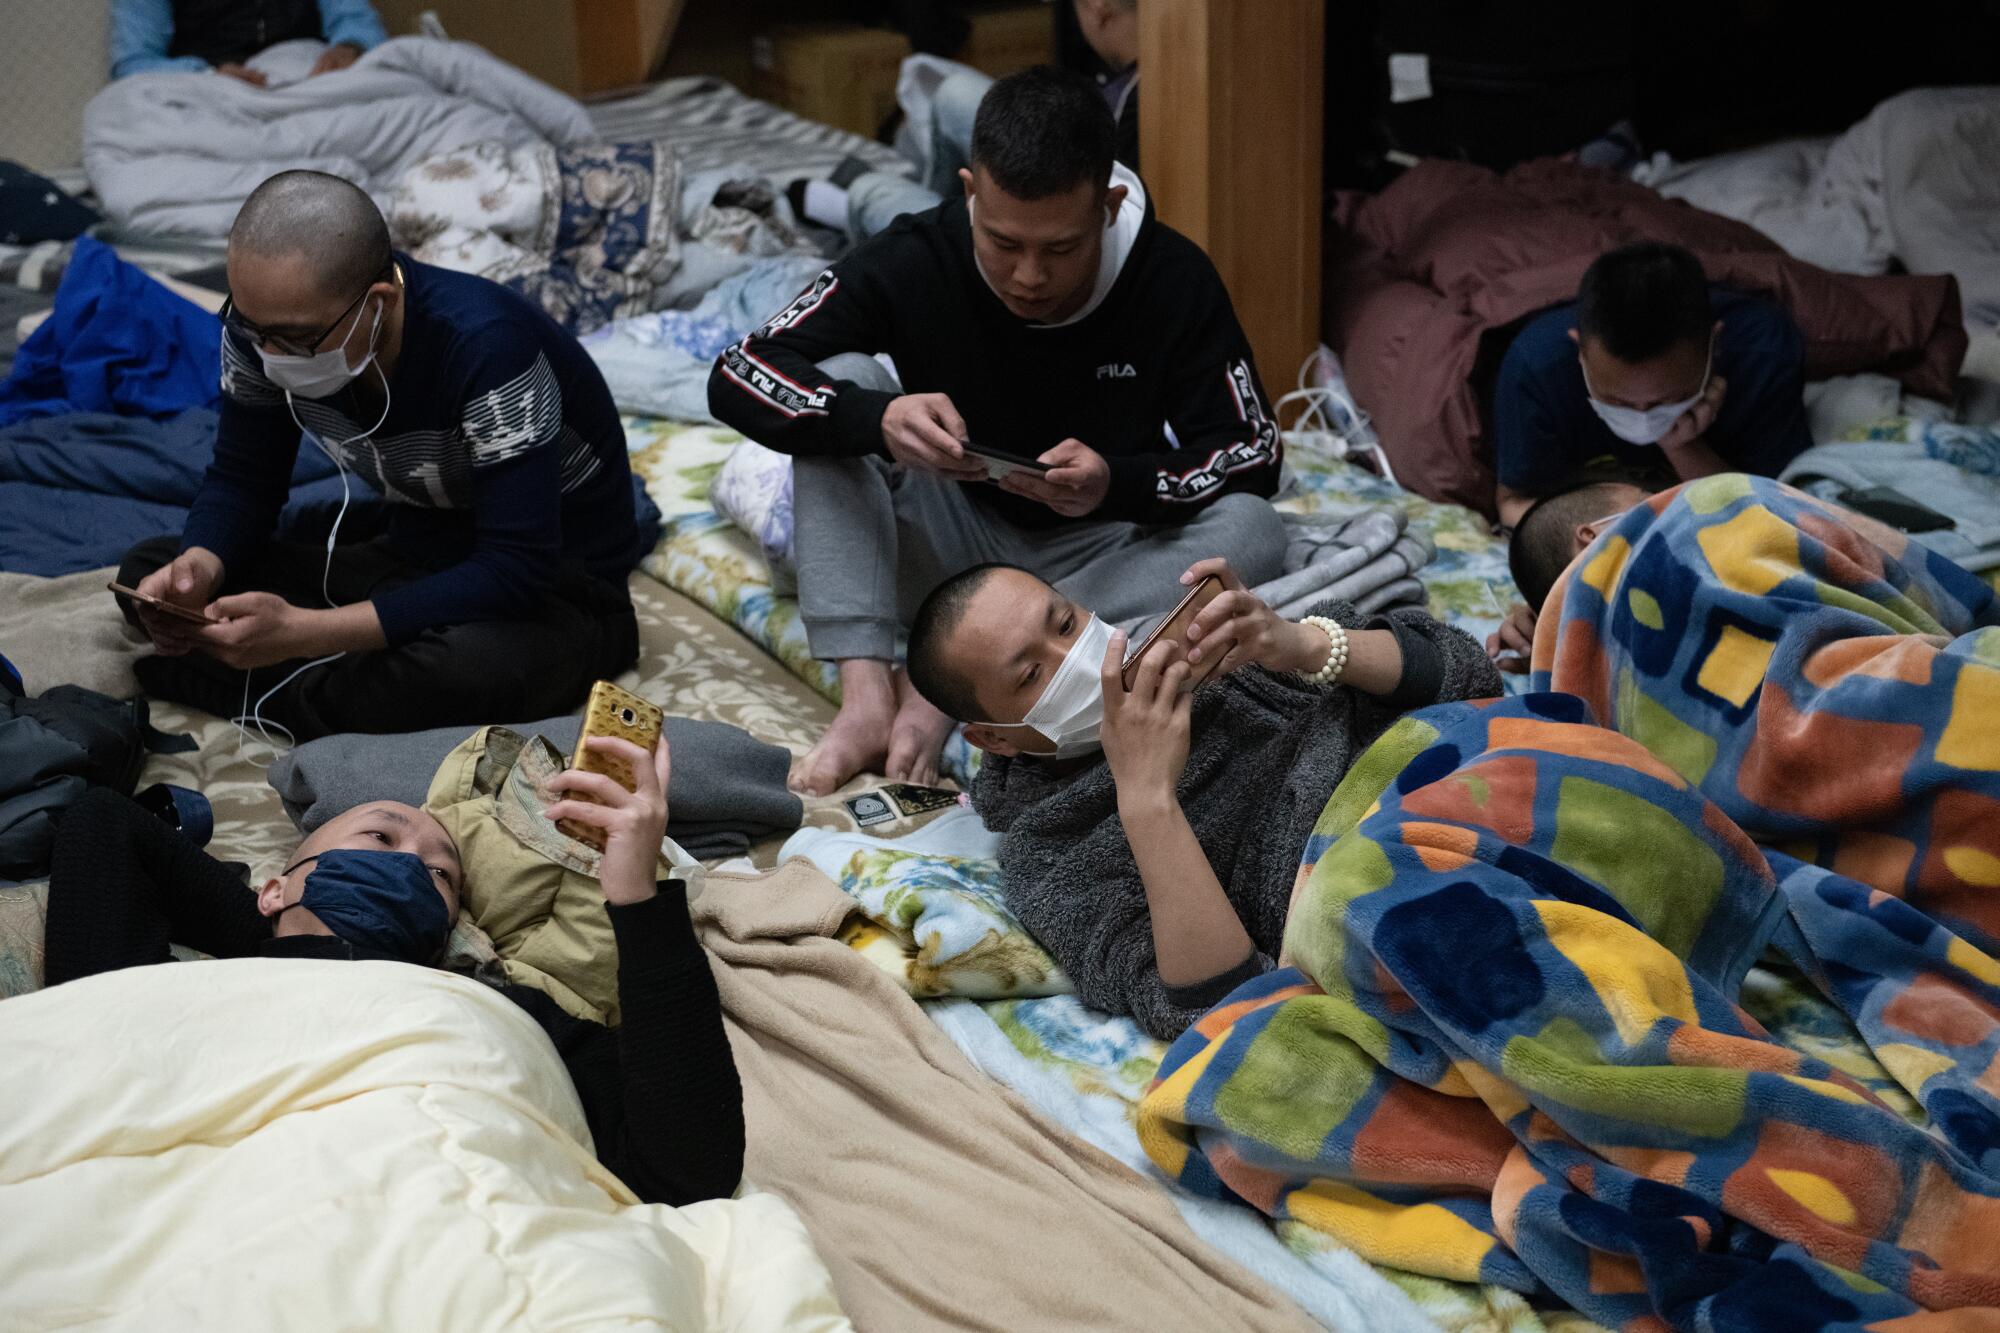 Several people reading their phones as they sit or lie on bedding on a floor